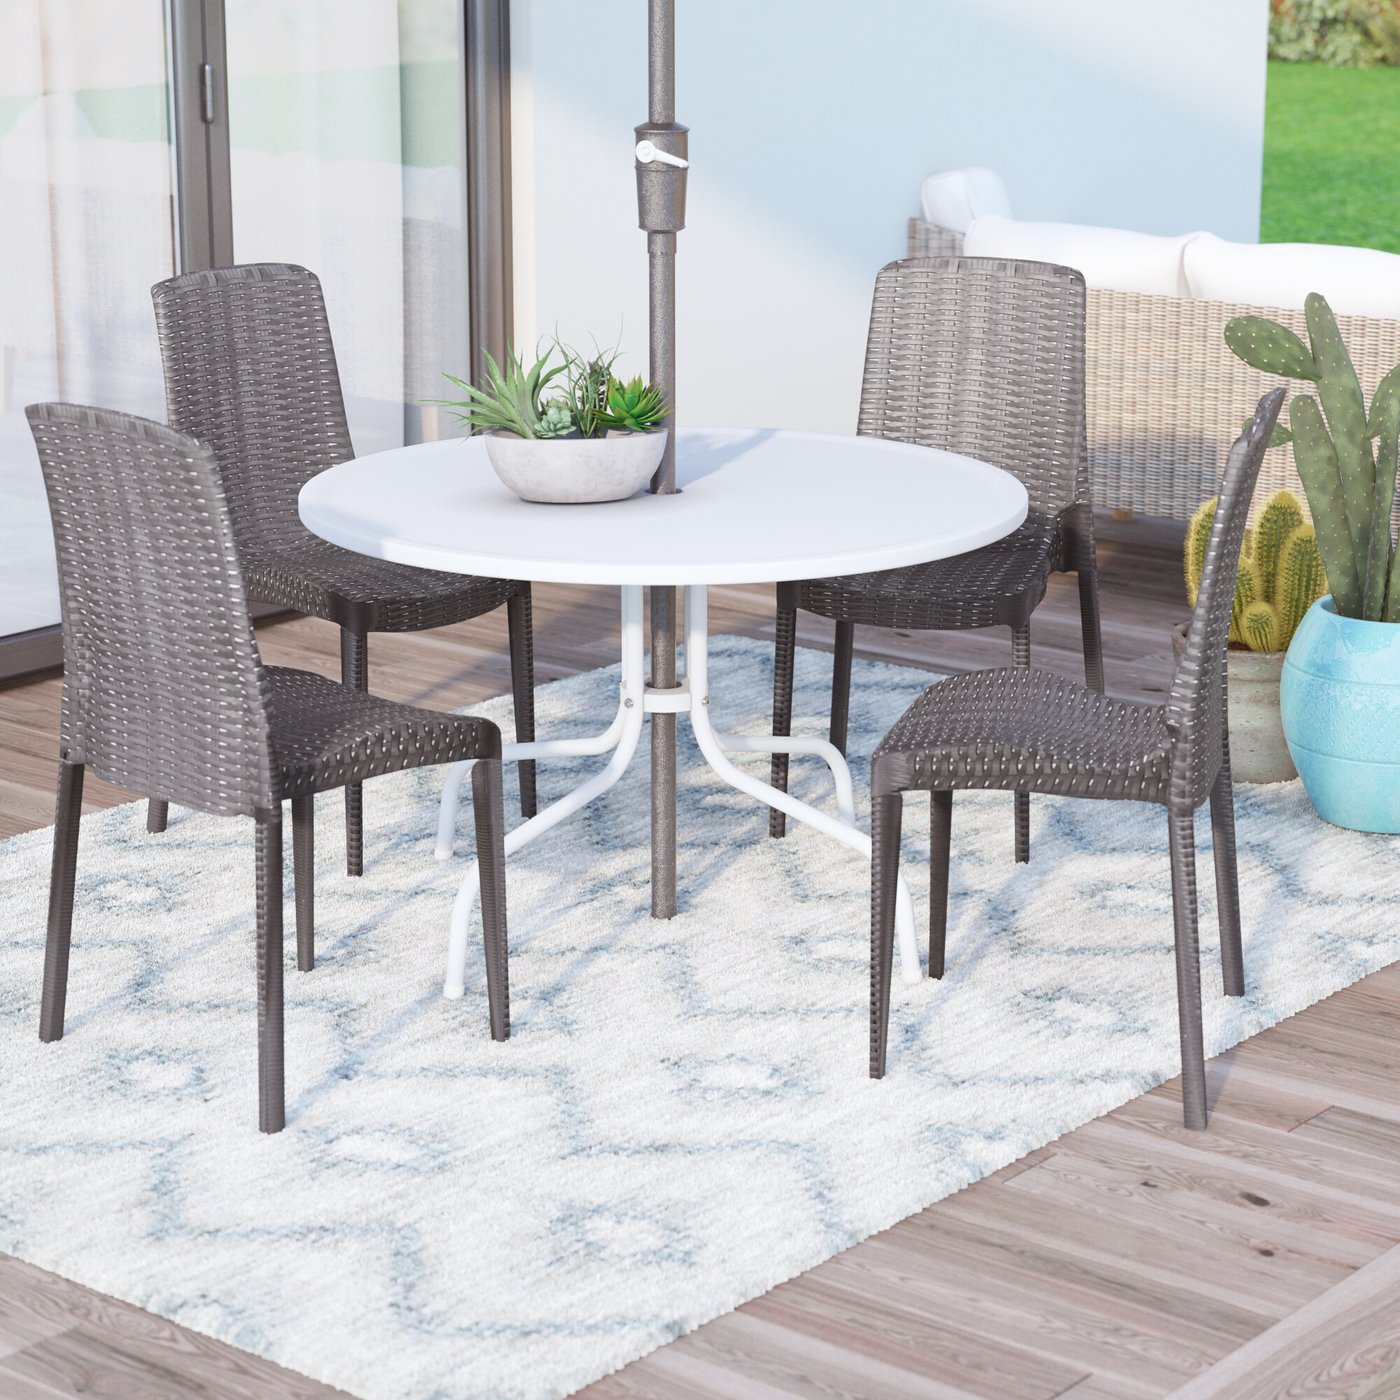 5 Expert Tips To Choose Patio Dining Chairs - VisualHunt